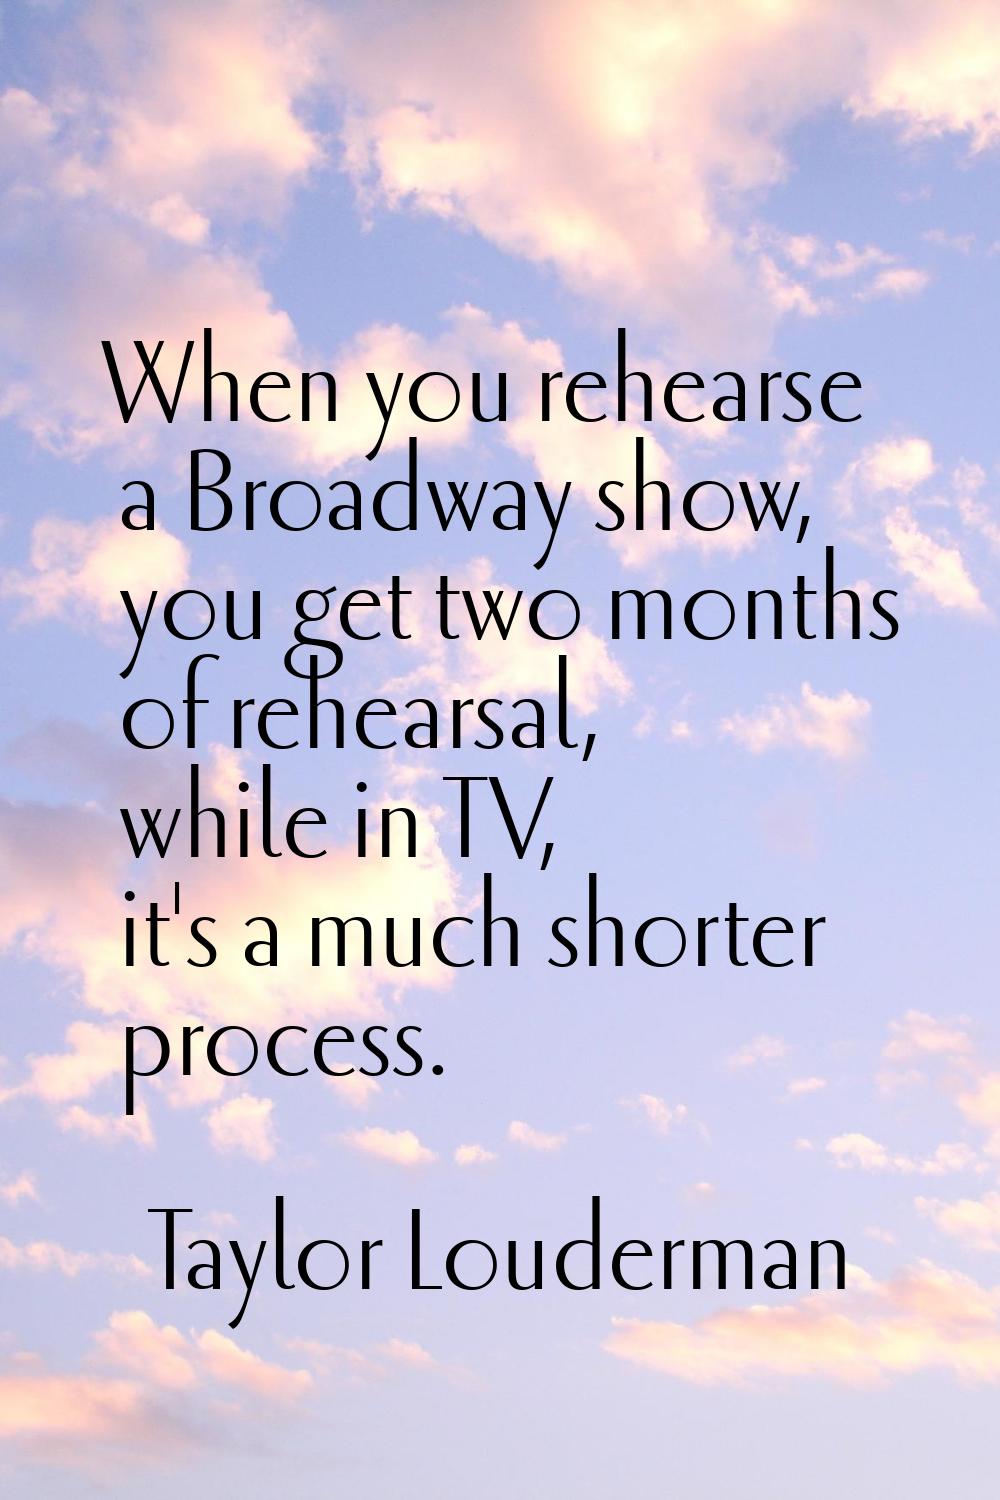 When you rehearse a Broadway show, you get two months of rehearsal, while in TV, it's a much shorte